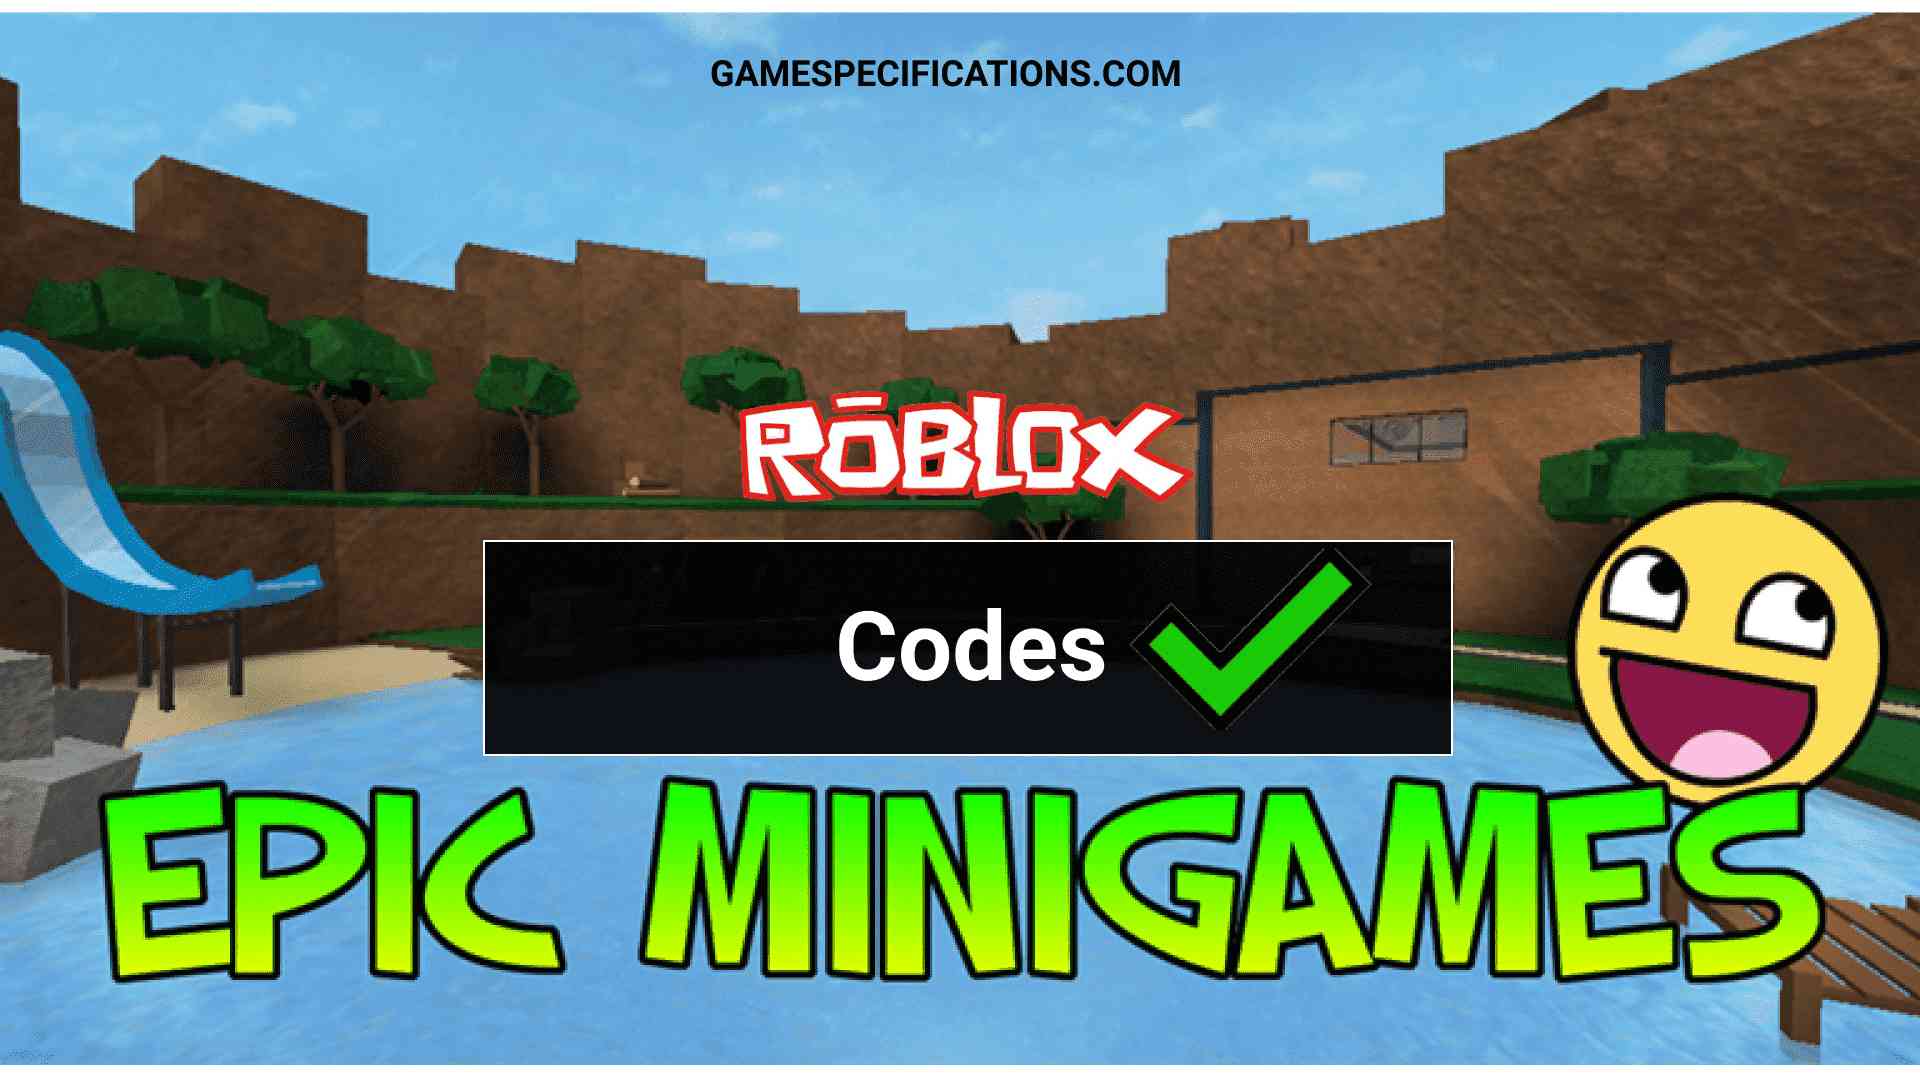 Roblox Epic Minigames Codes To Get Free Items July 2021 Game Specifications - roblox epic minigames secret room